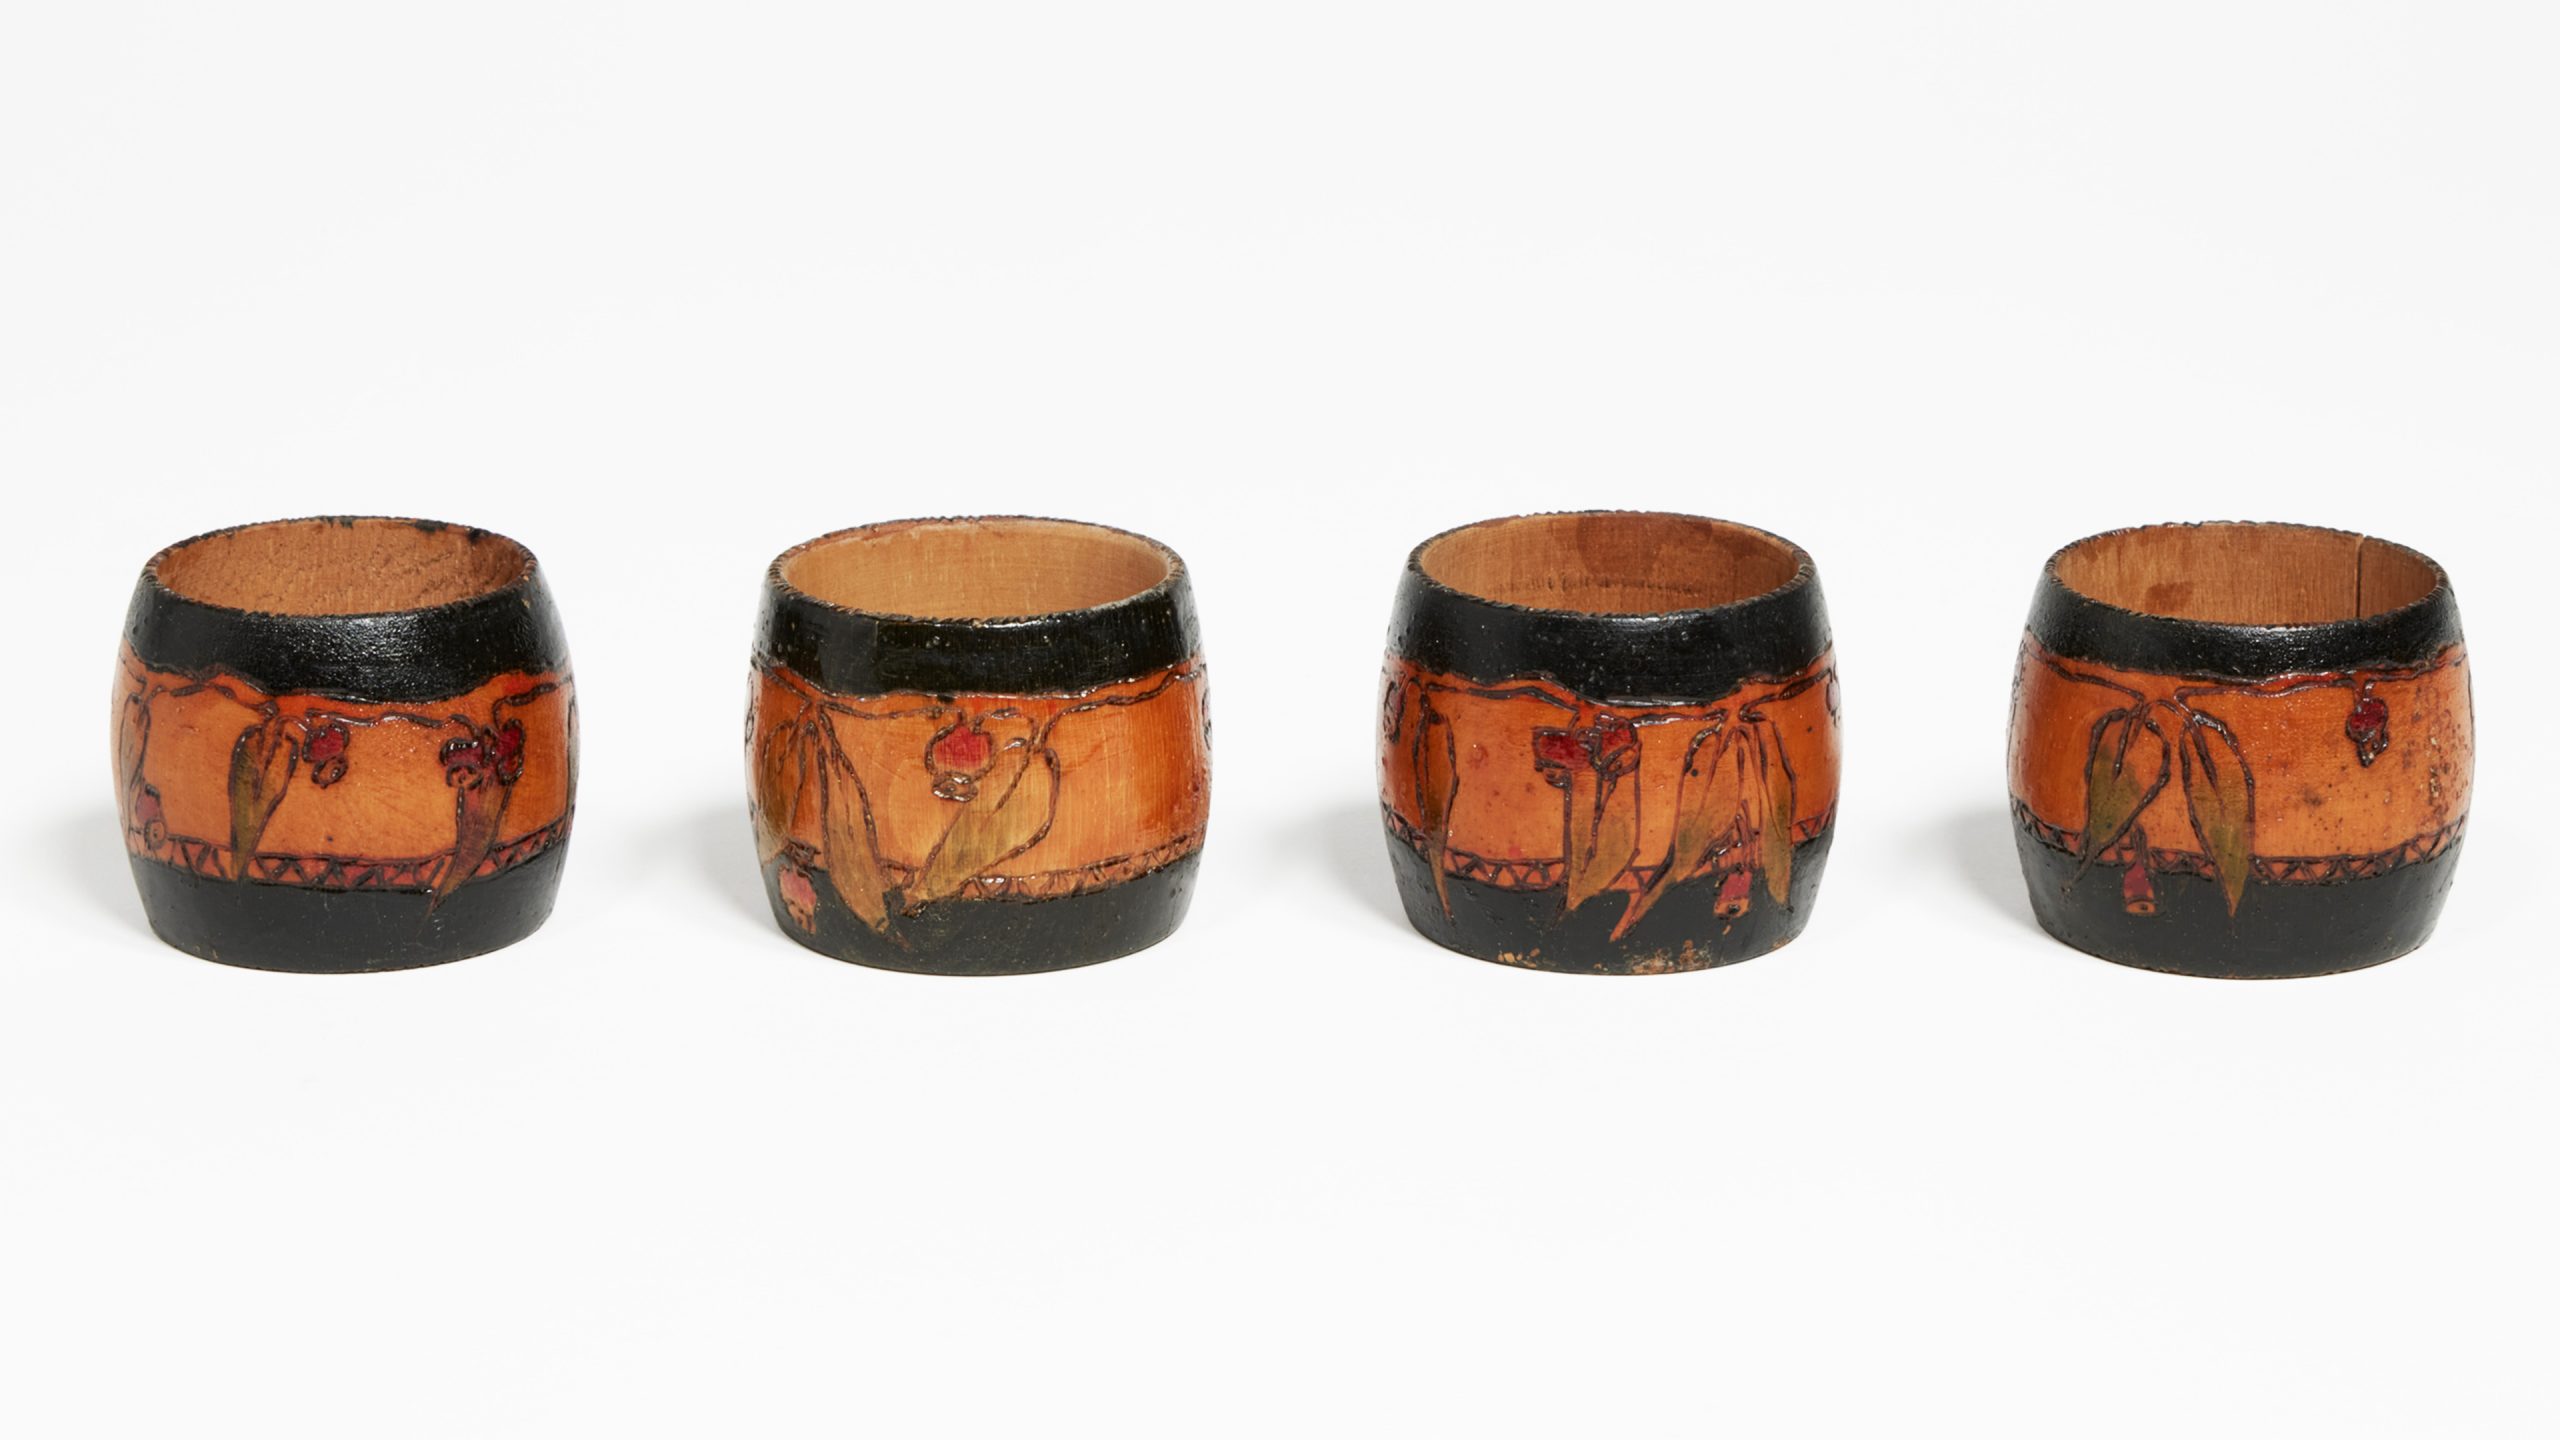 Four wooden napkin rings with gumnuts and black bands burned into them